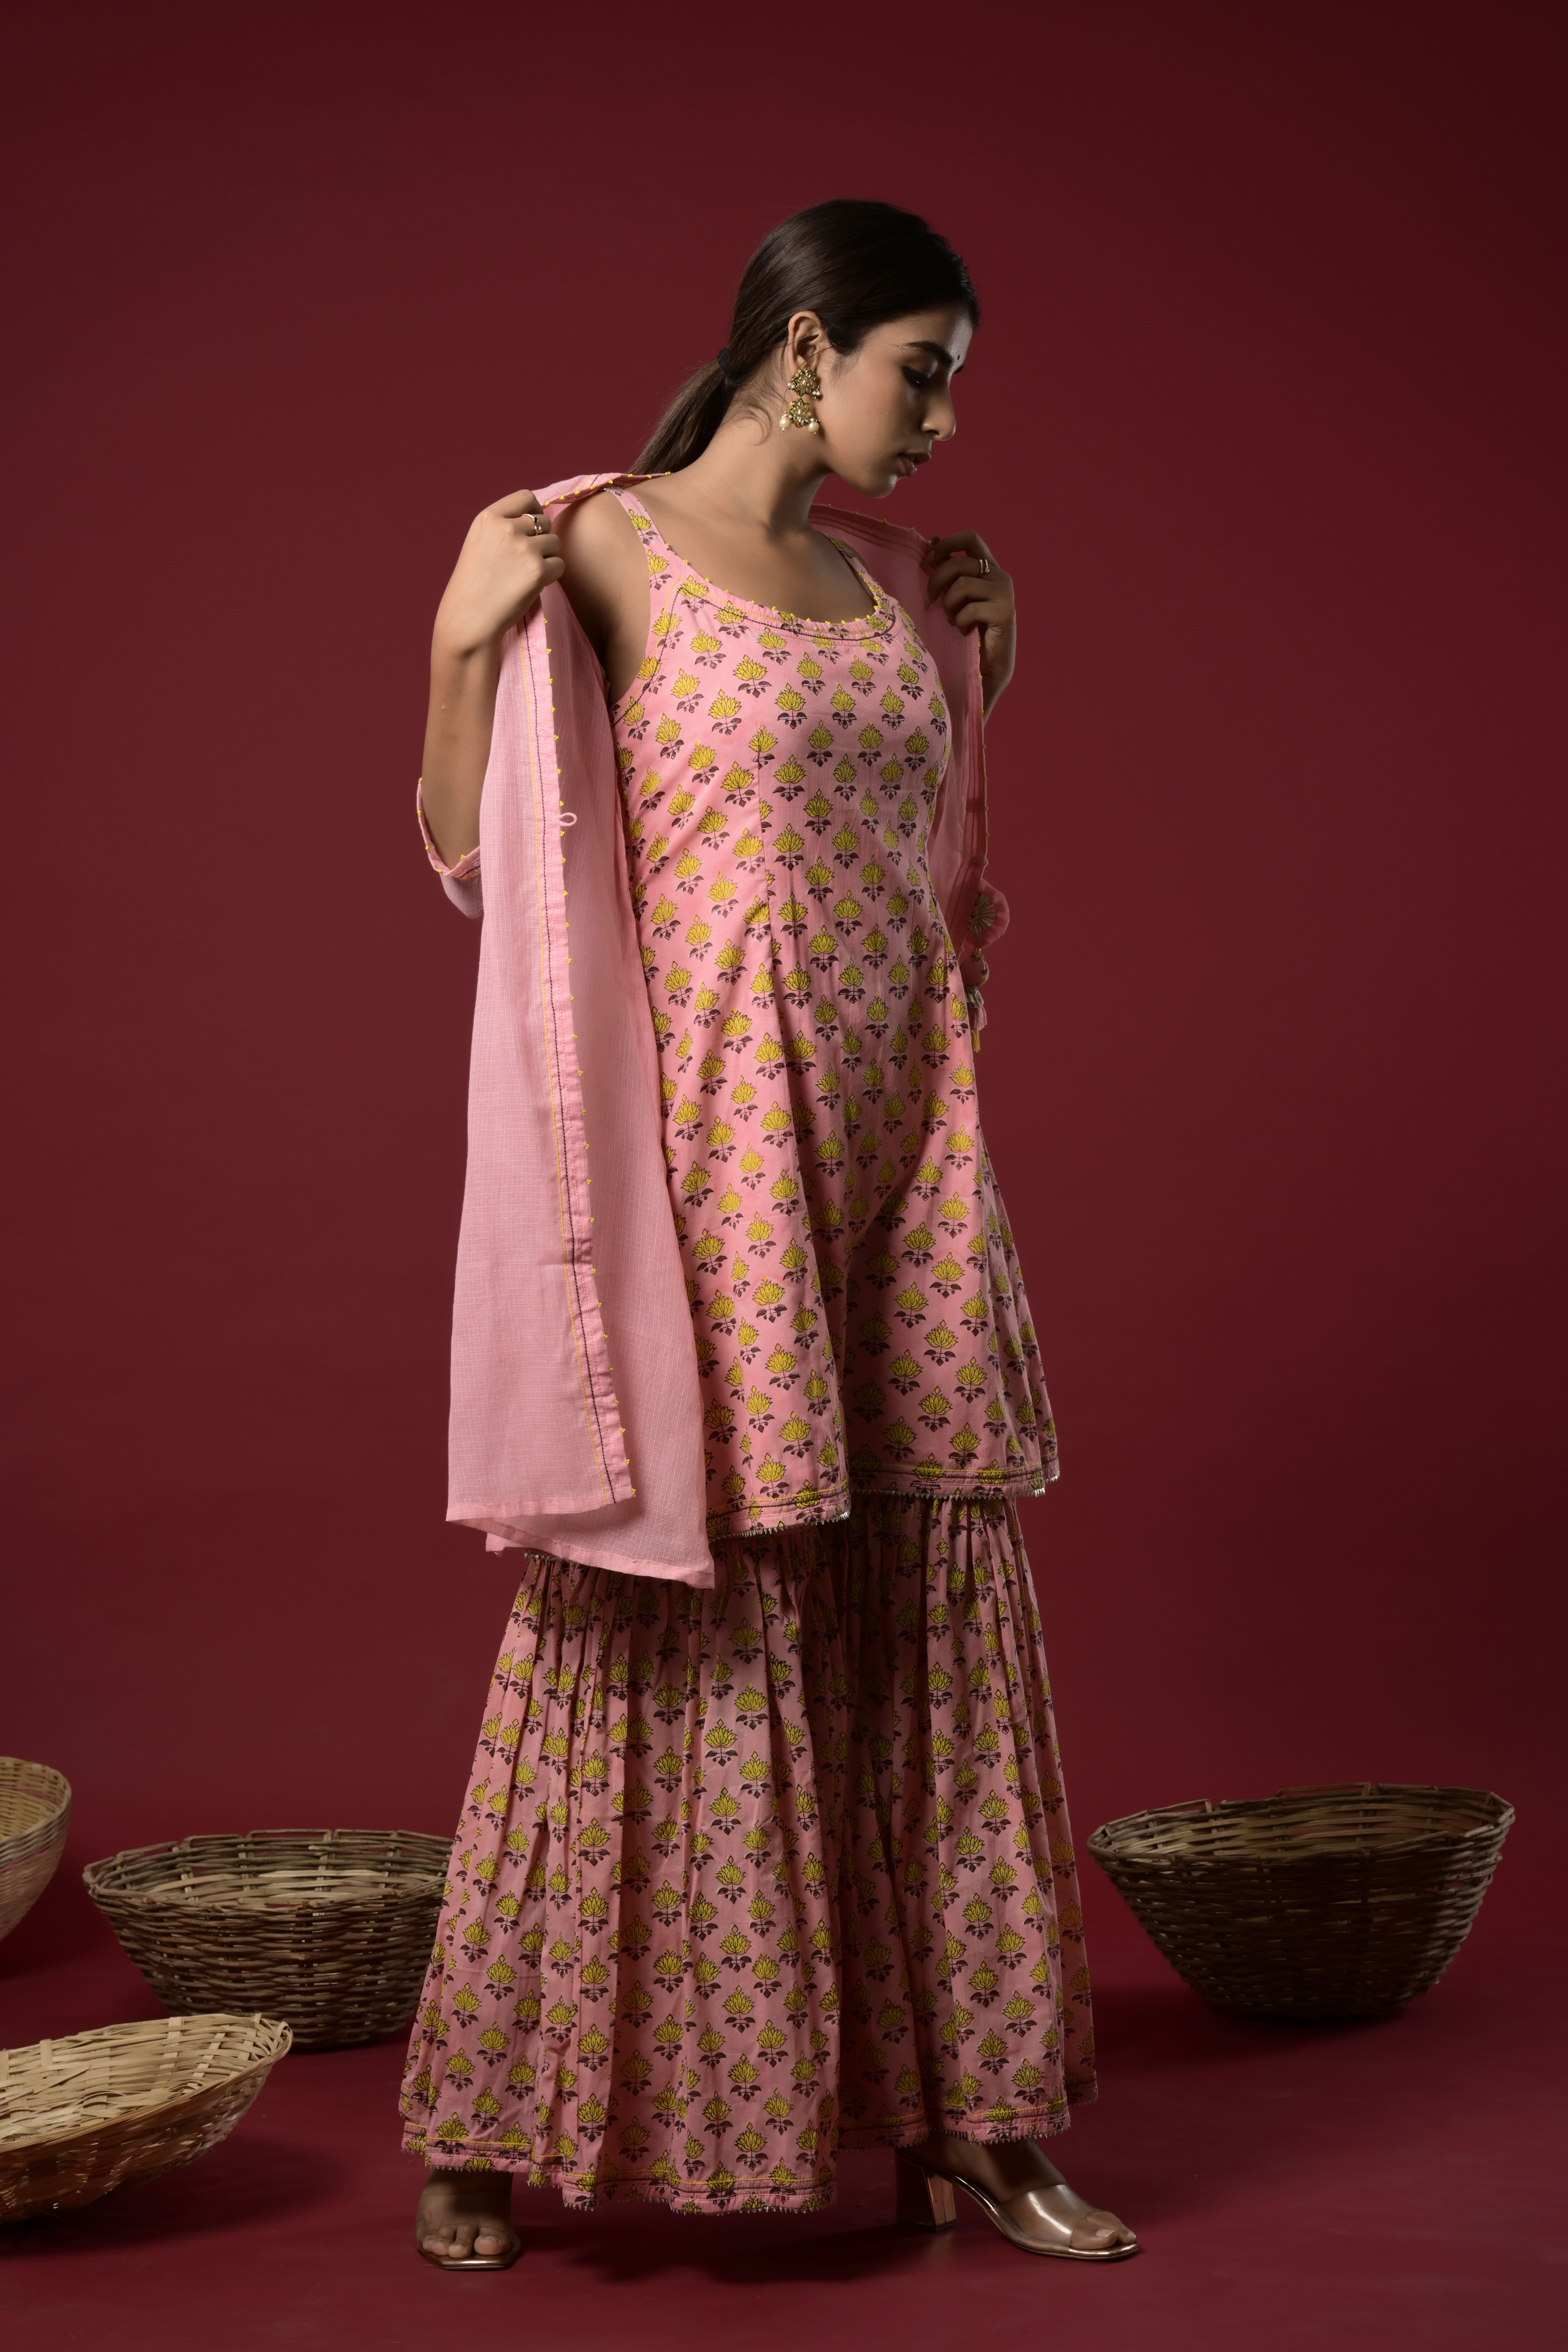 Block printed short kurta and sharara with embellishment on the neck and kota doriya jacket with tassel in the front.